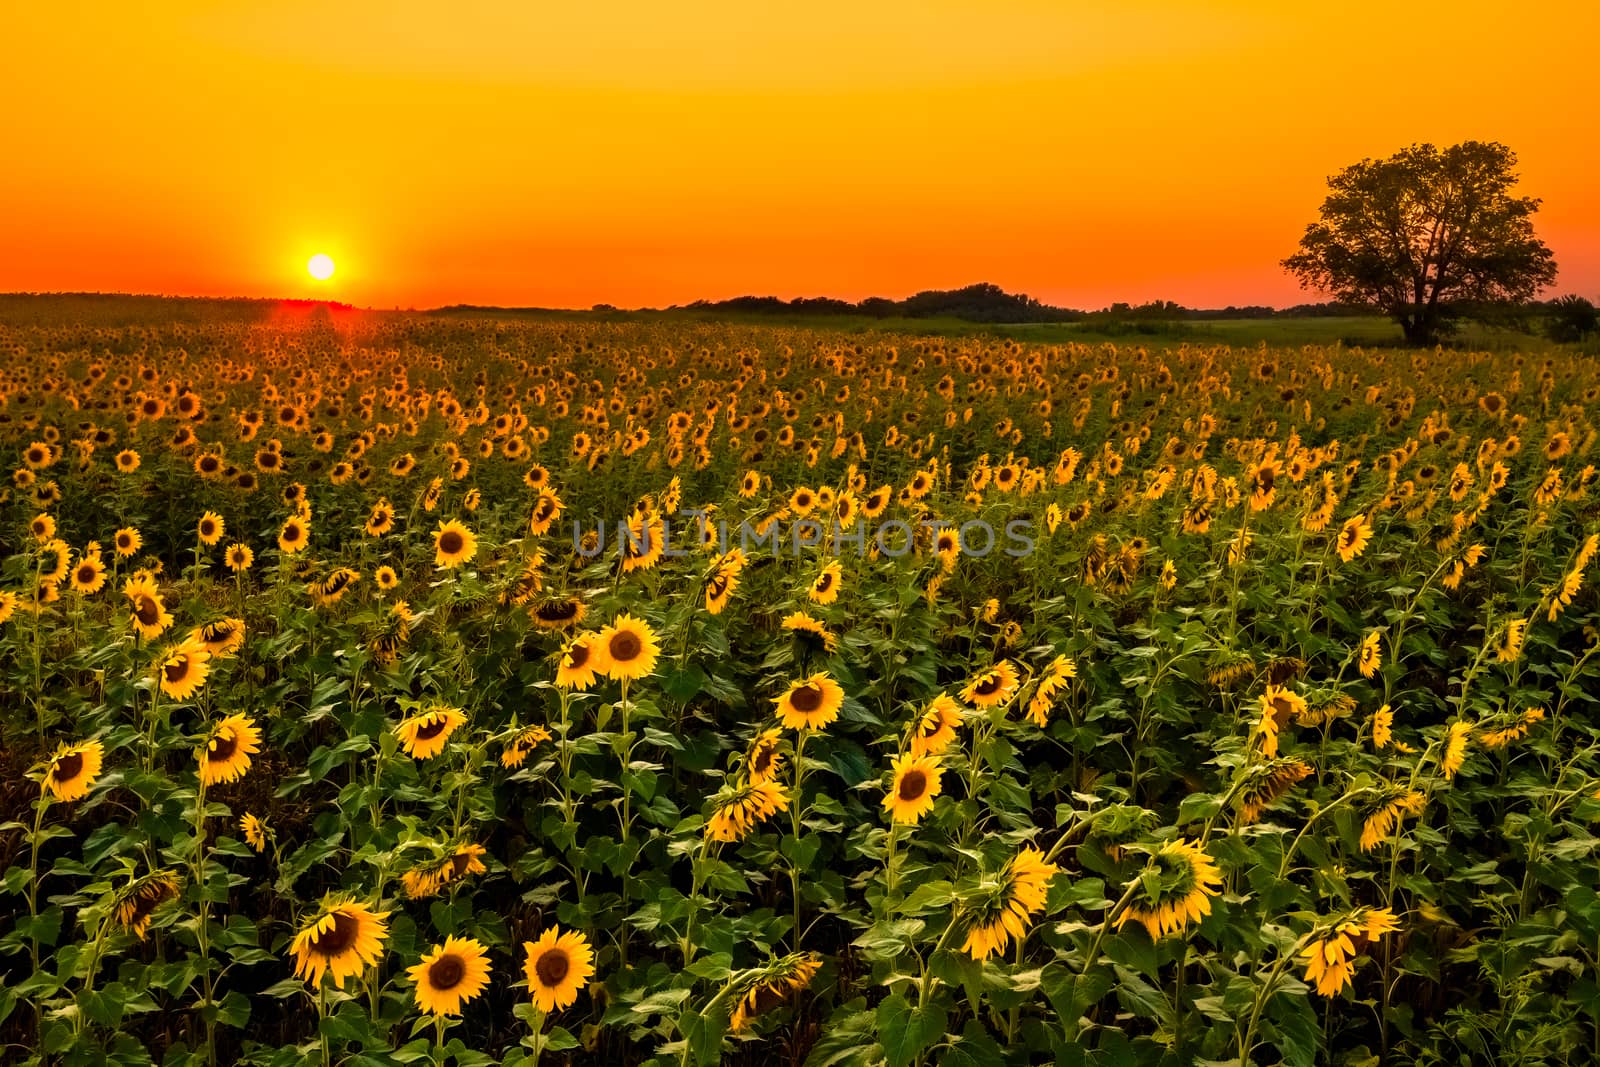 Midwest Sunflowers by TommyBrison